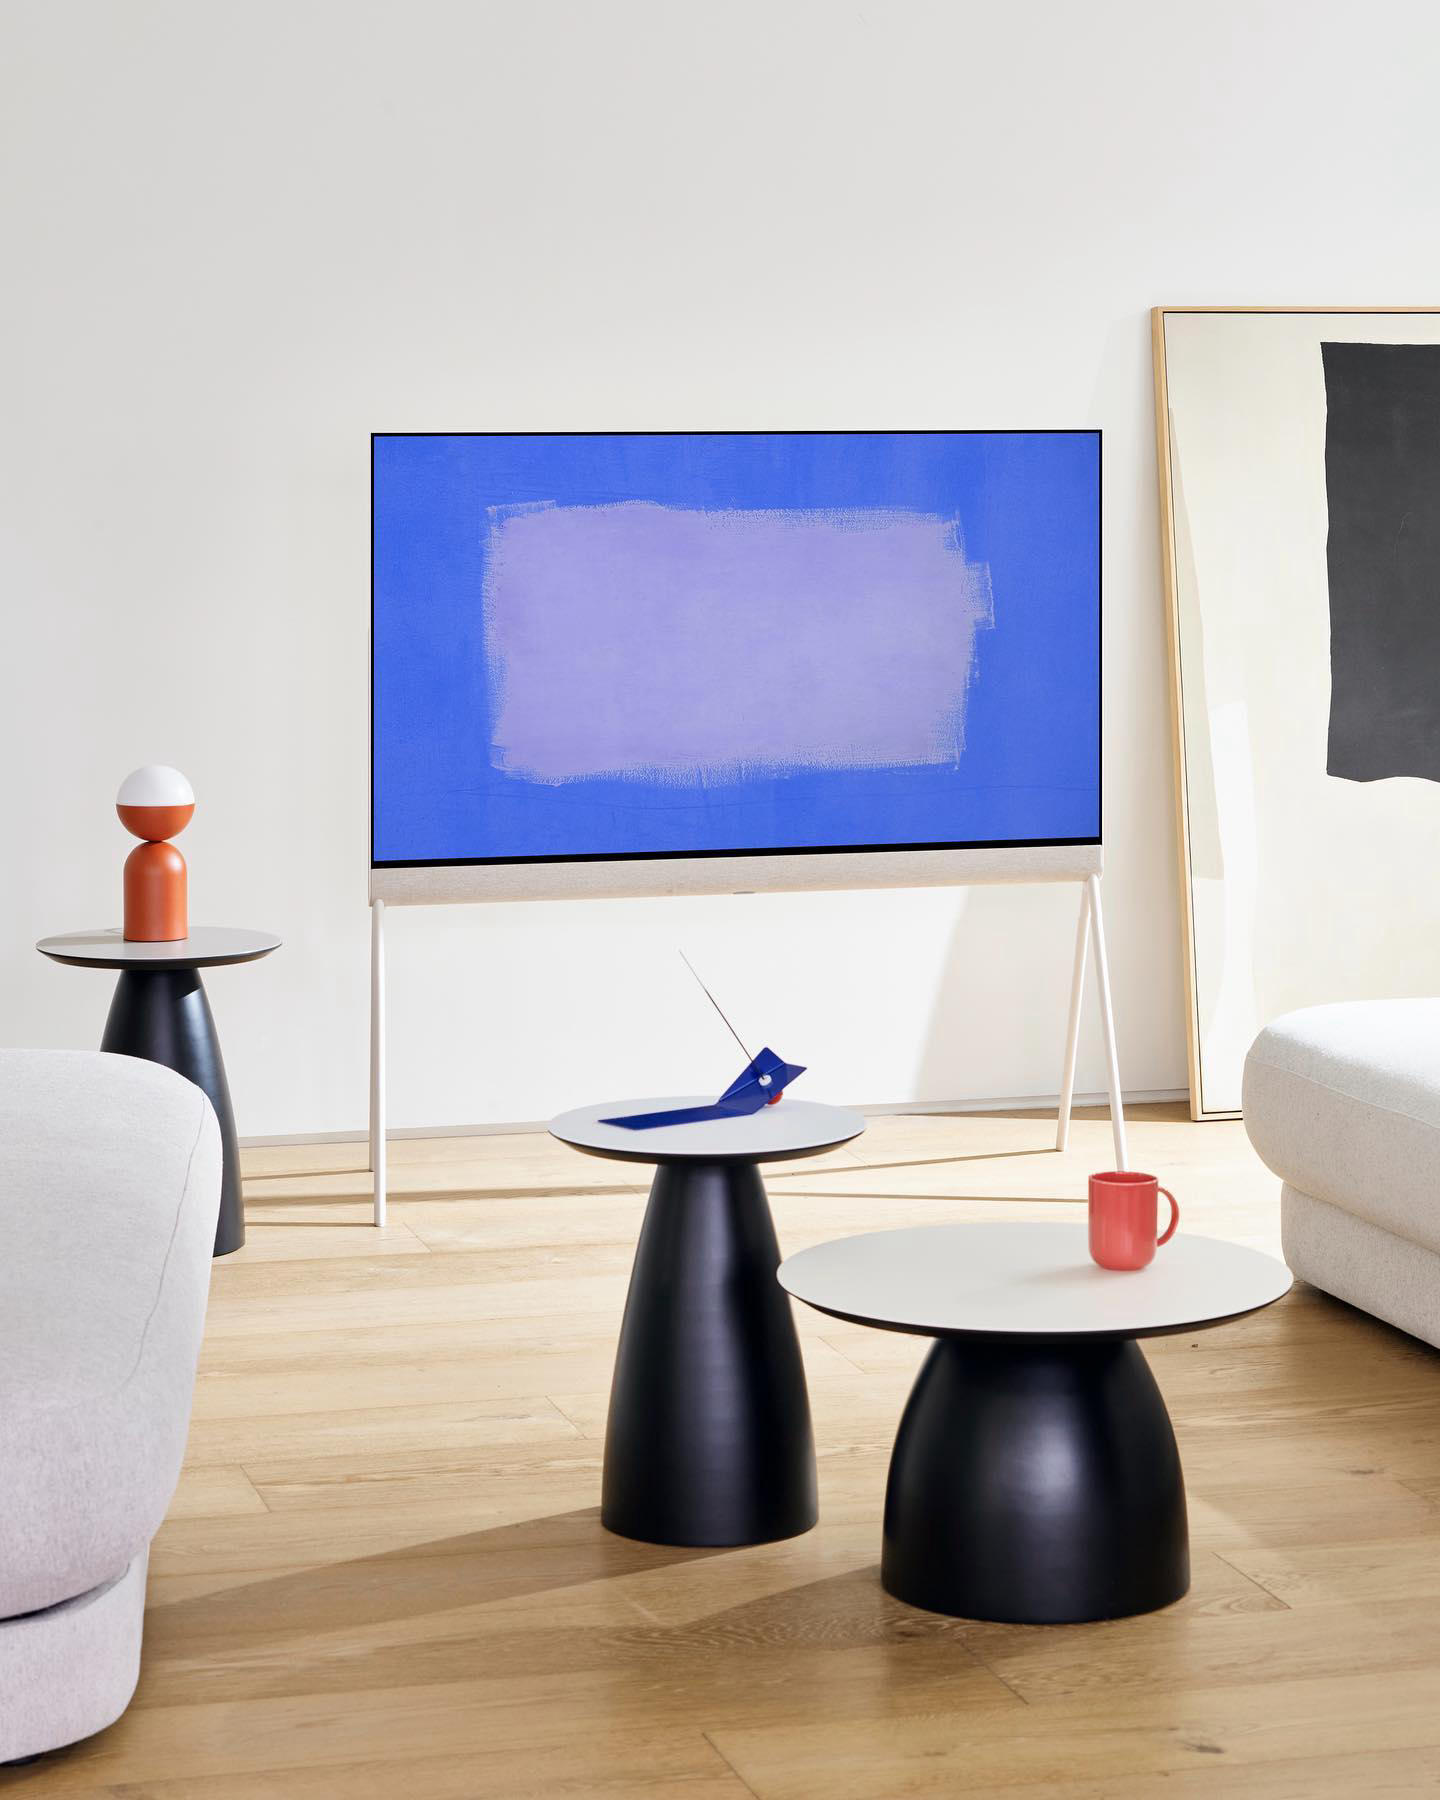 image  1 Art & Architecture - Meet the New LG OLED #lg_uk Objet collection Posé TV